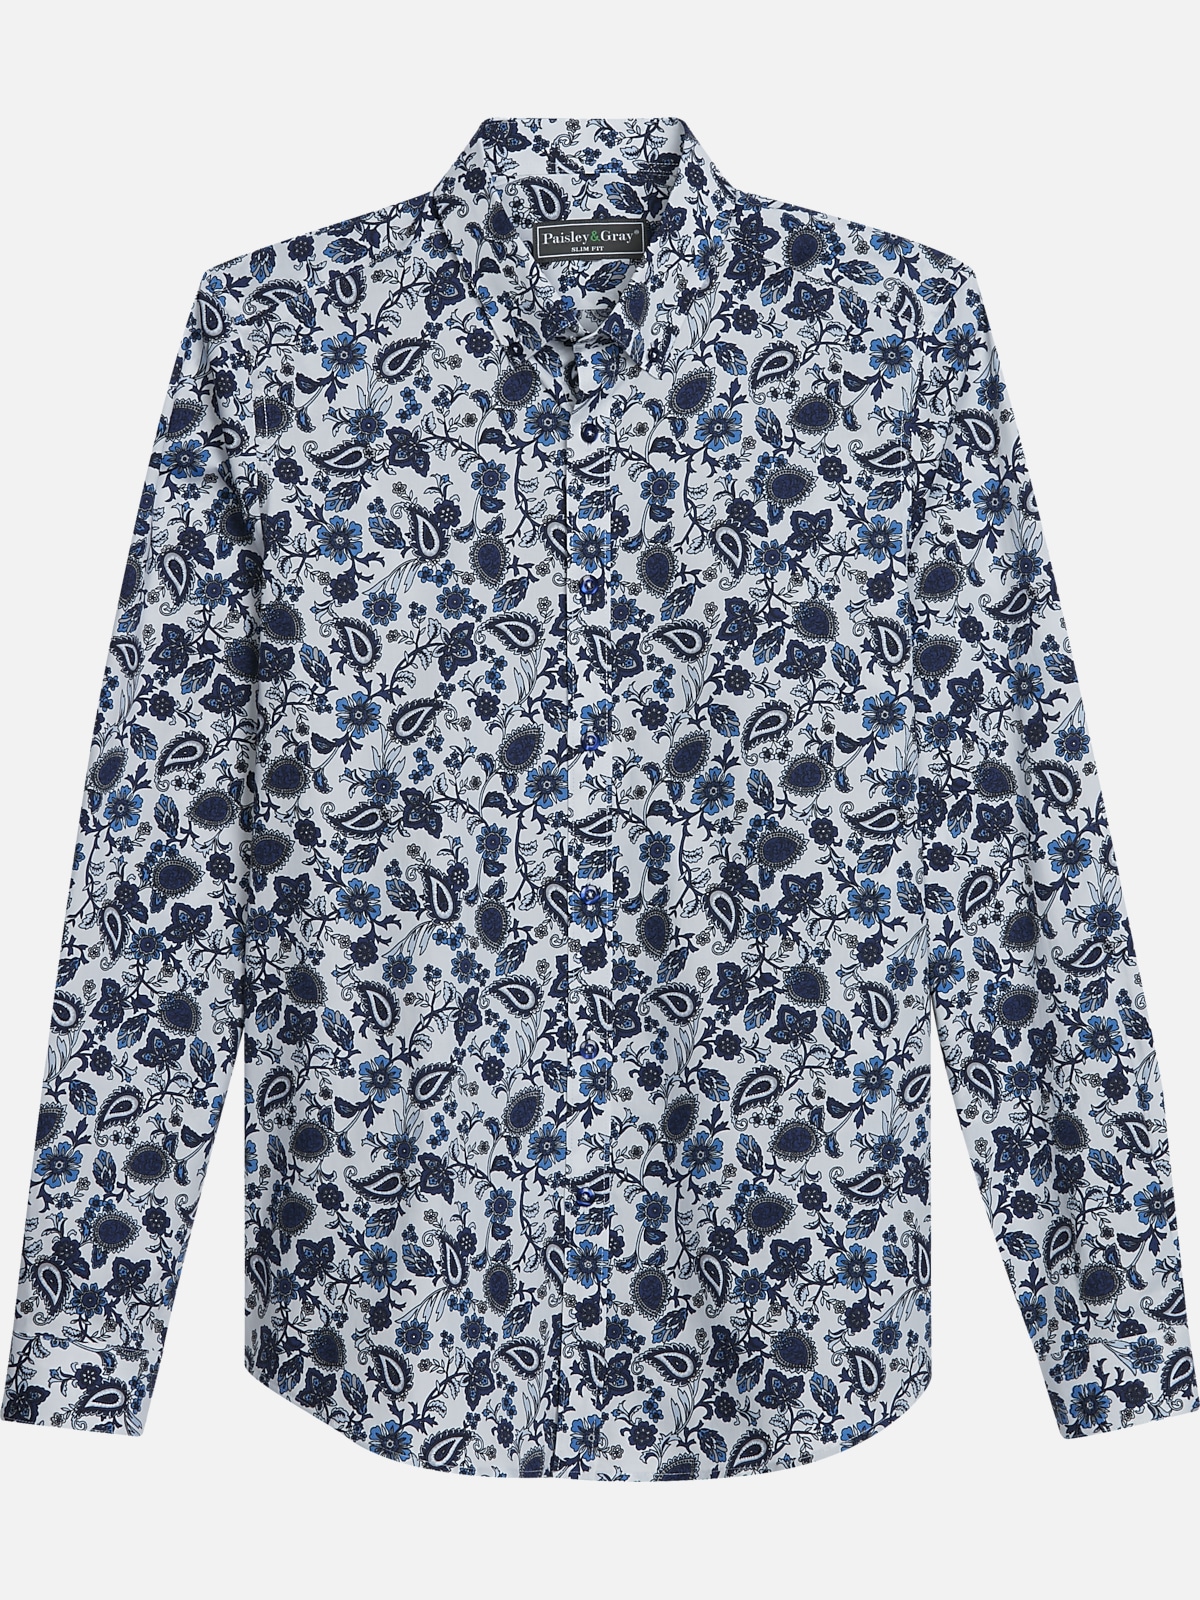 Paisley & Gray Slim Fit Floral Paisley Sport Shirt | All Clearance $39. ...